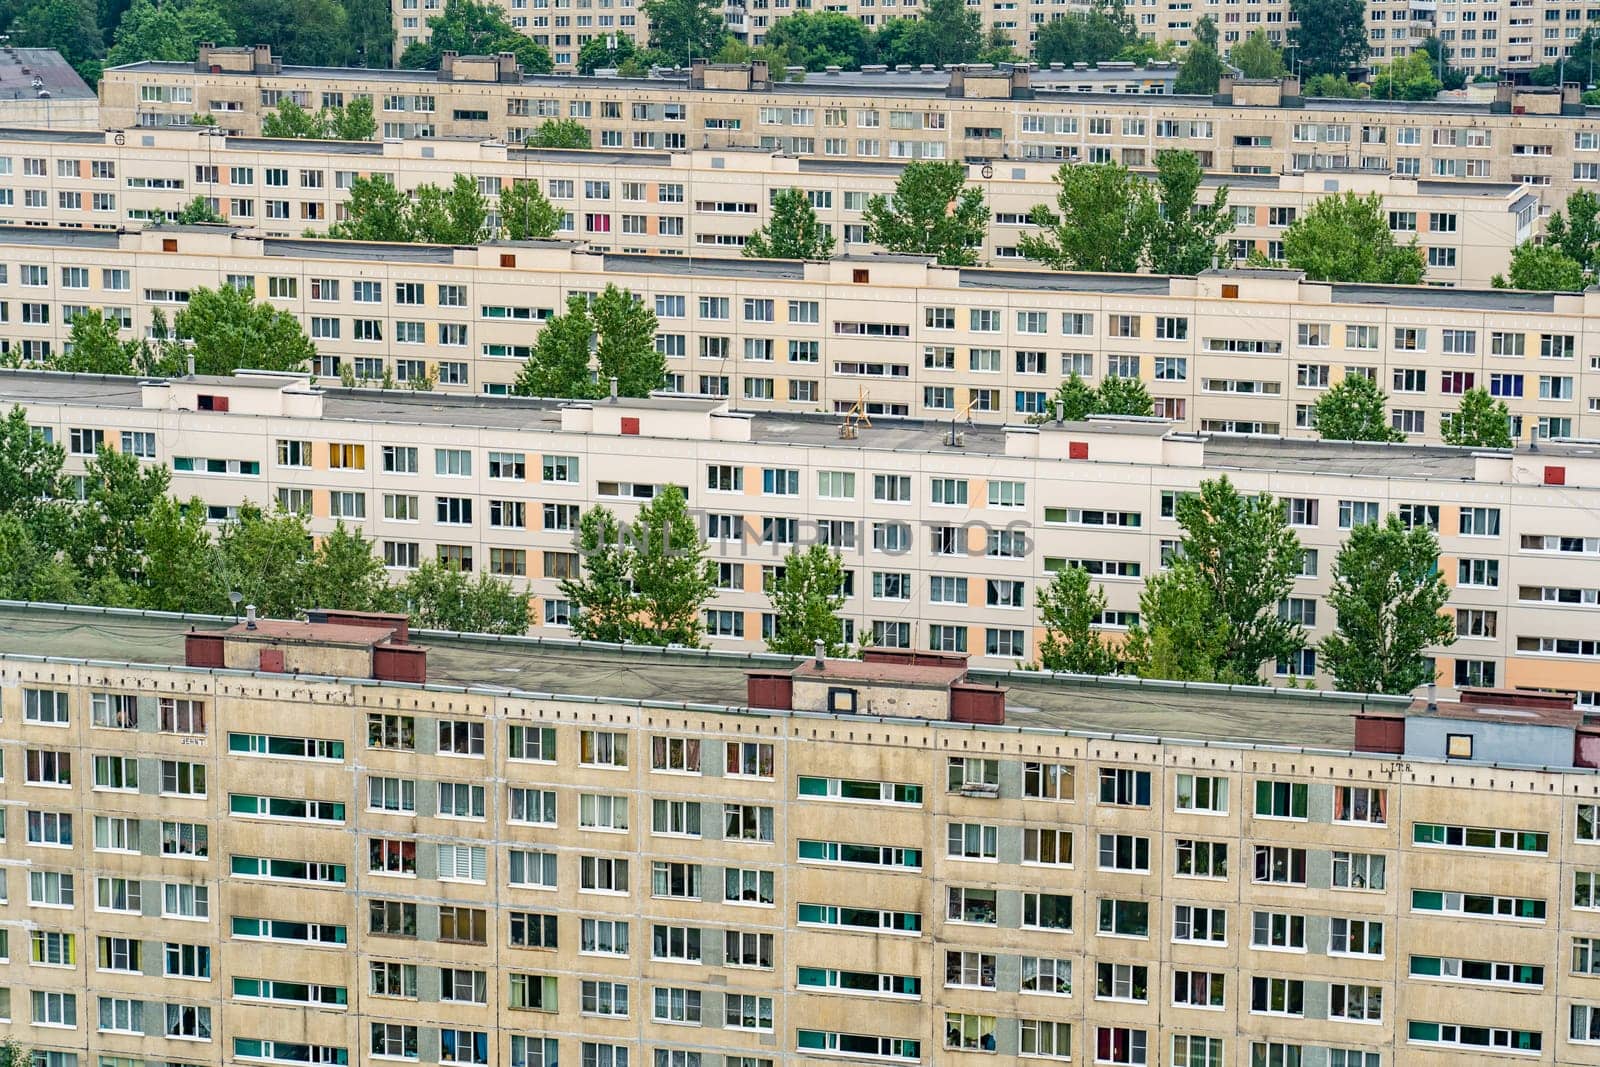 Multi-storey residential apartment buildings in a residential area. by DovidPro